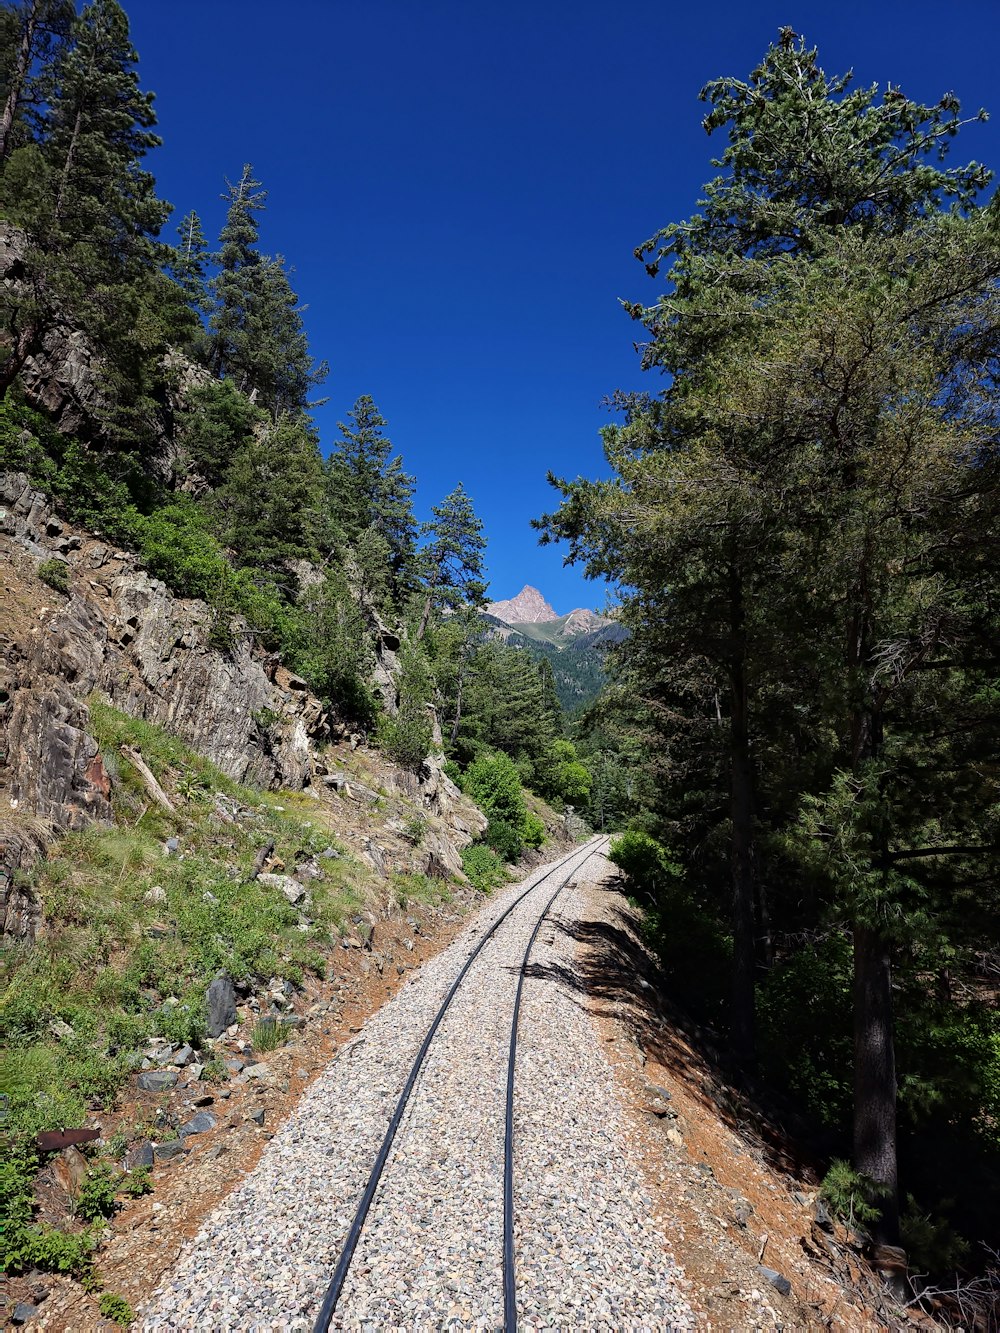 a train track running through a forest with mountains in the background